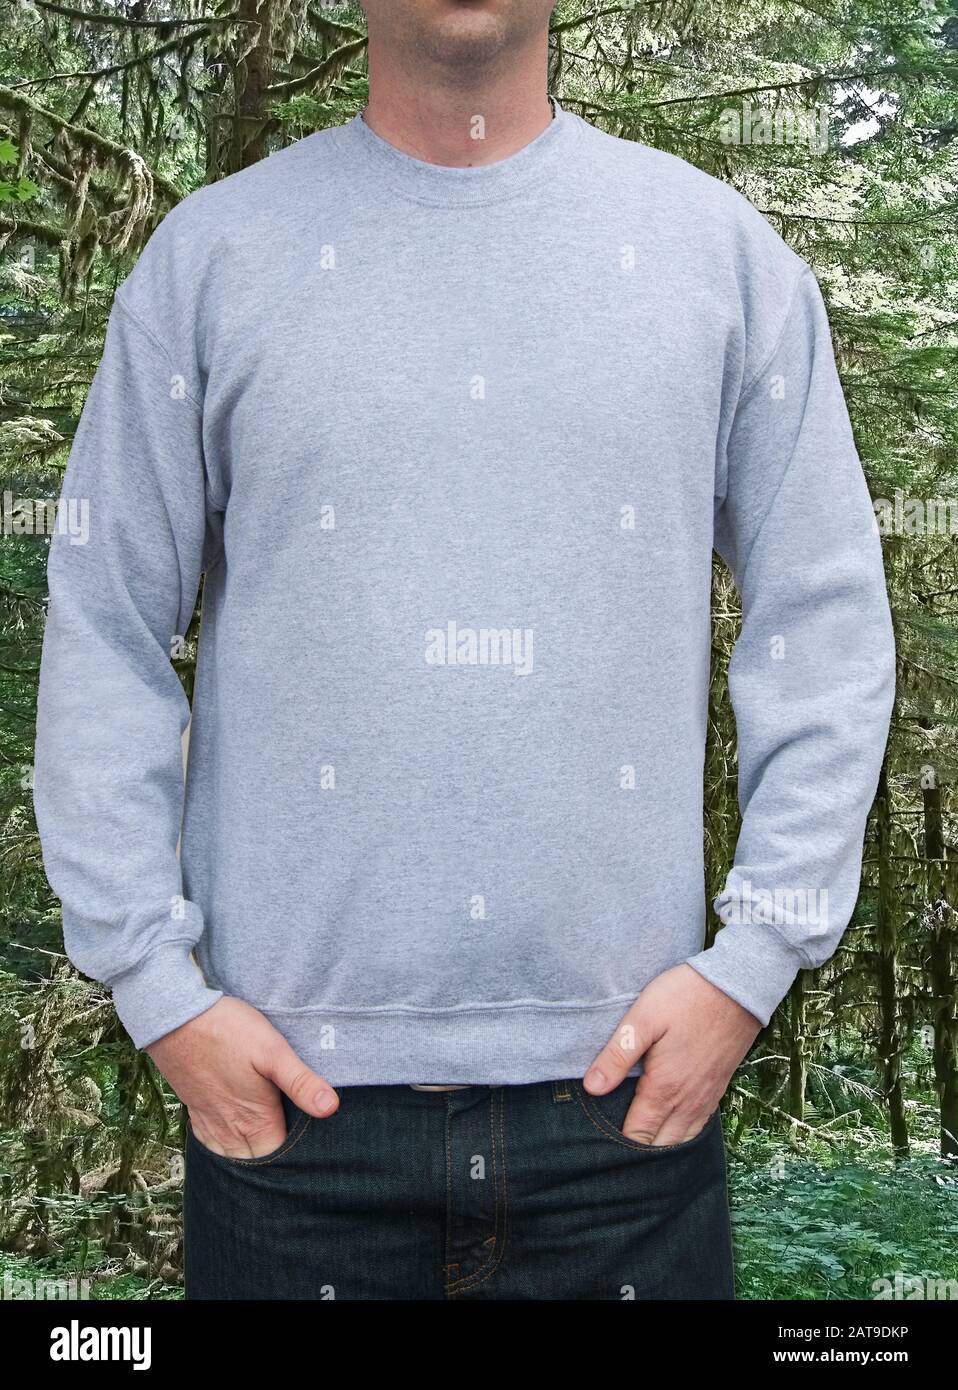 Guy sweatshirt mockup gray sweatshirt with room for text or design with a forest background.  Clothing and fashion related garment. Stock Photo